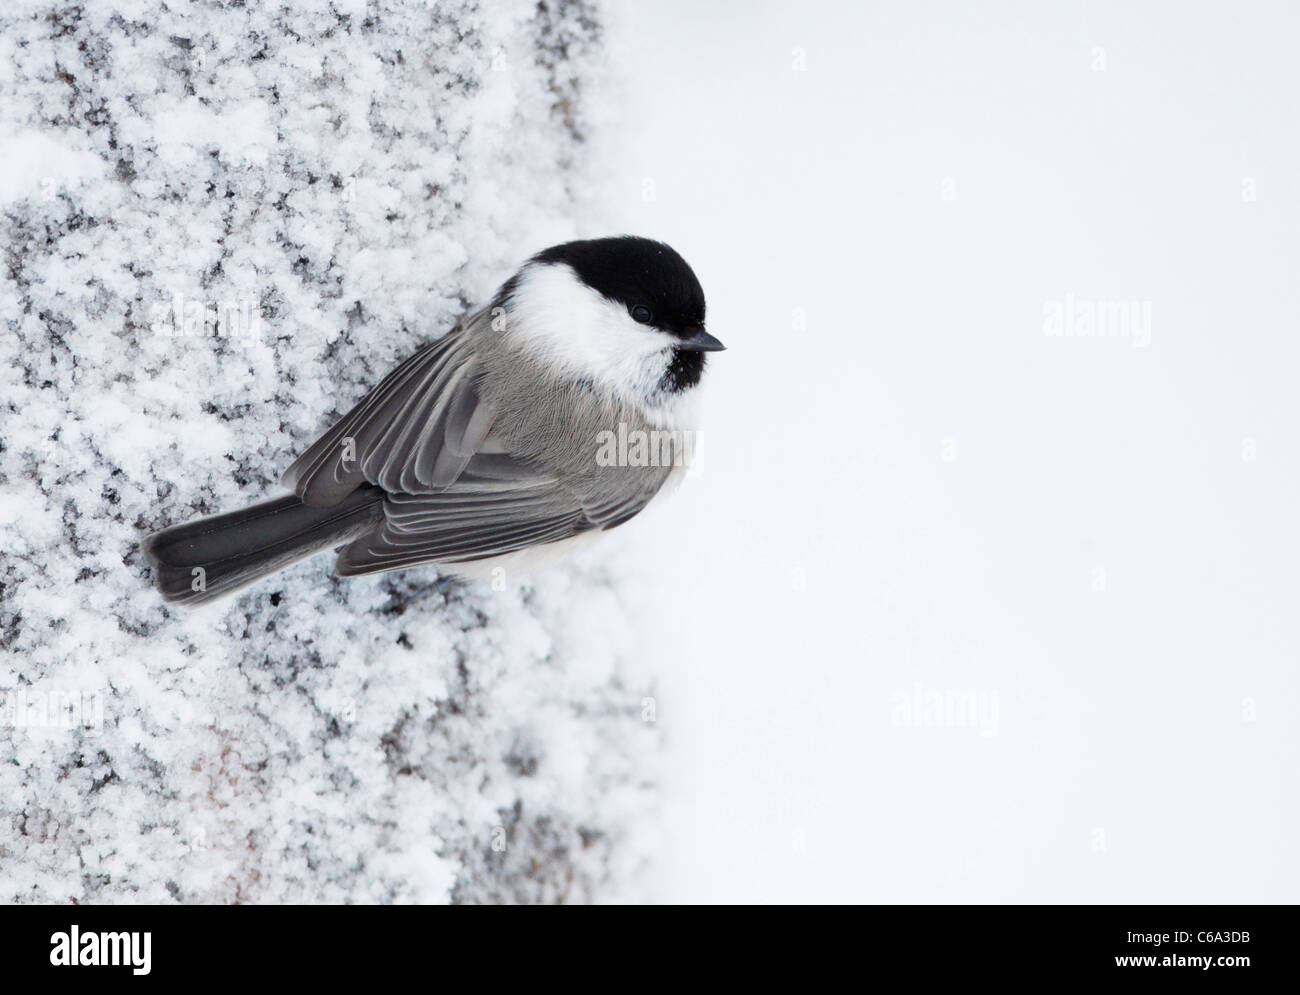 Coal Tit (Periparus ater, Parus ater). Adult clinging to a snowy tree trunk. Stock Photo